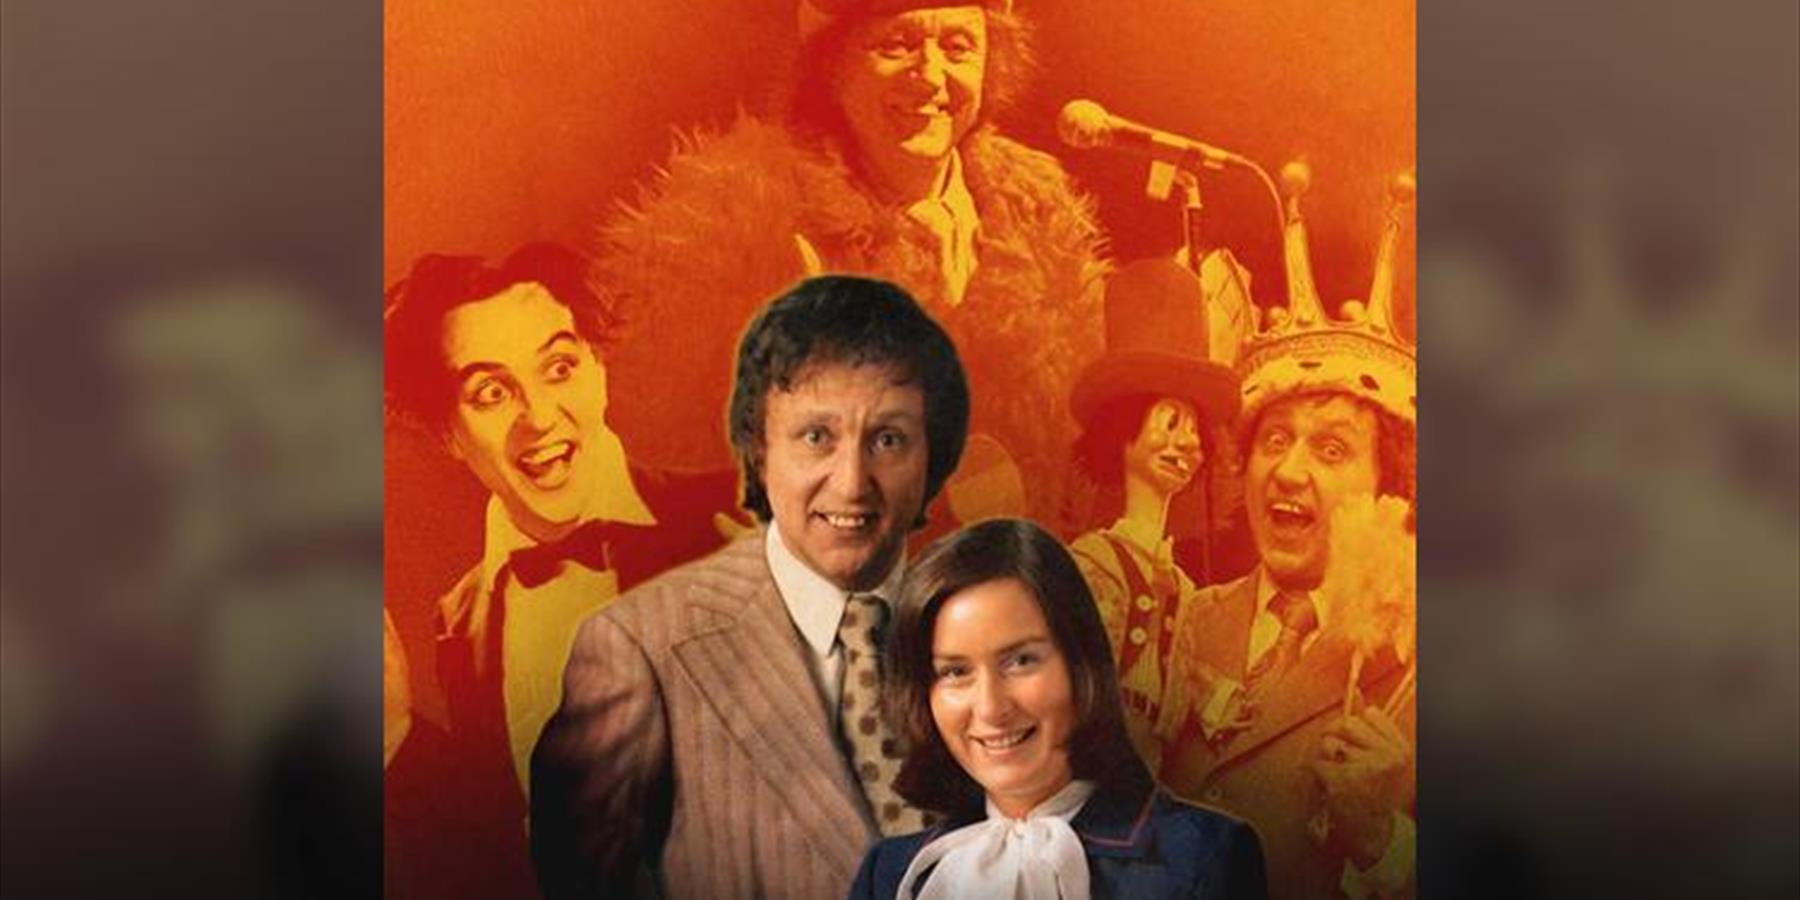 The Real Ken Dodd: The Man I Loved